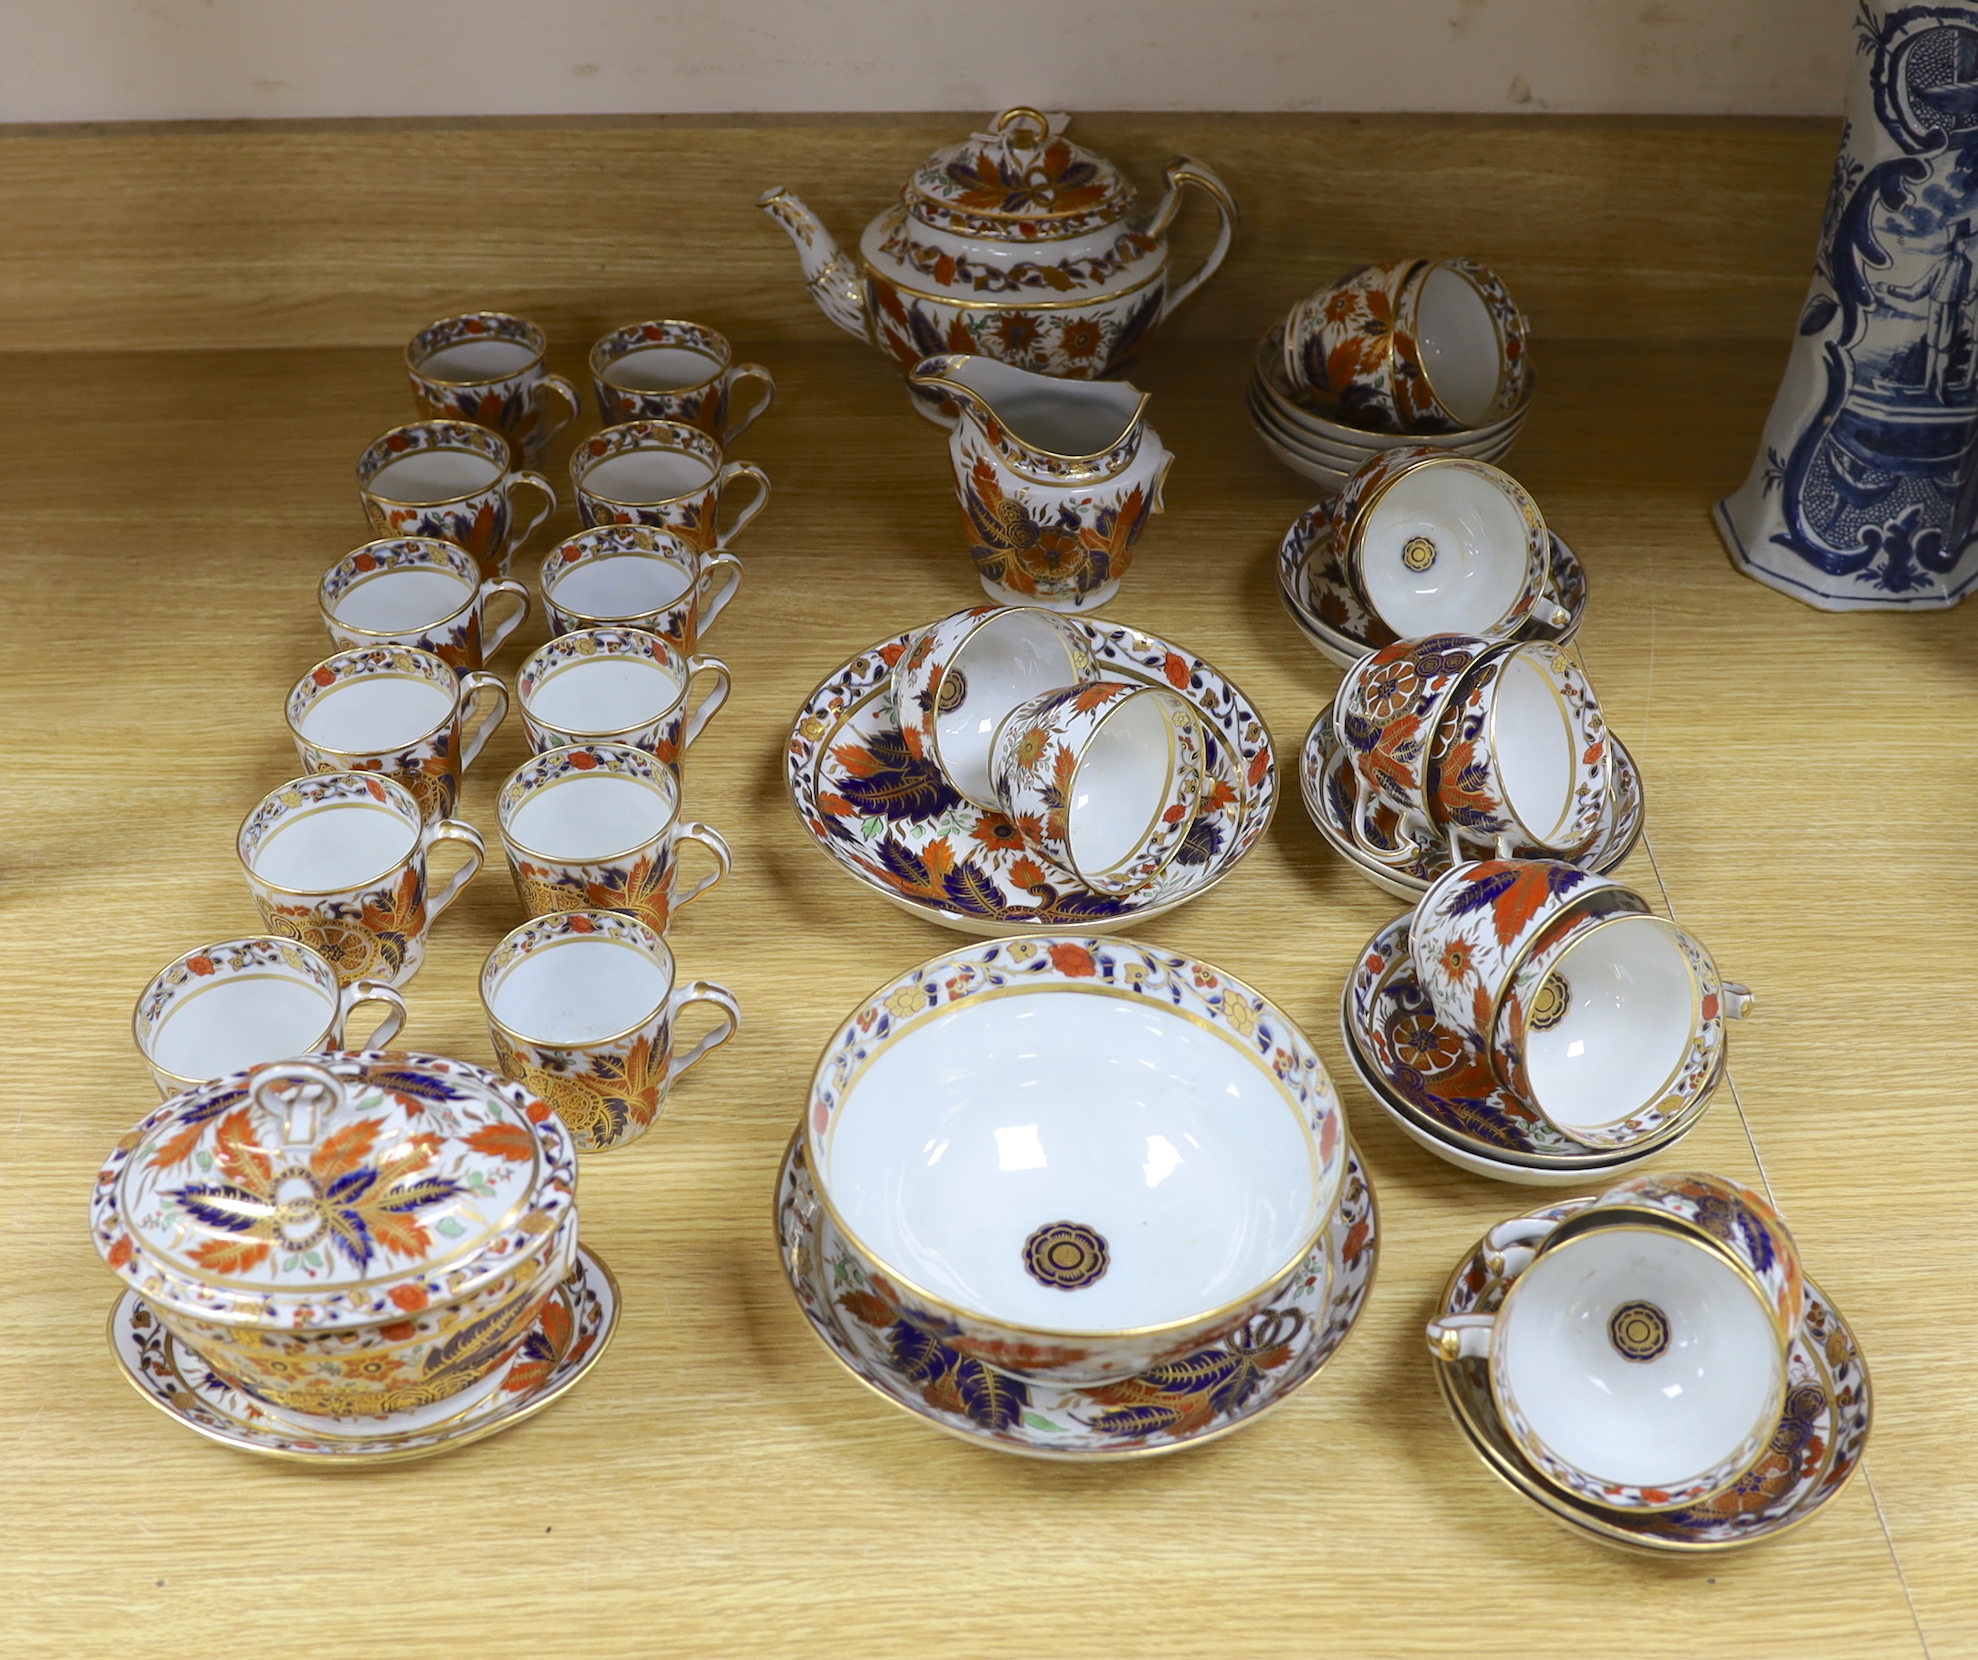 An early 19th century Chamberlain Worcester Japan pattern teaset, 43 pieces